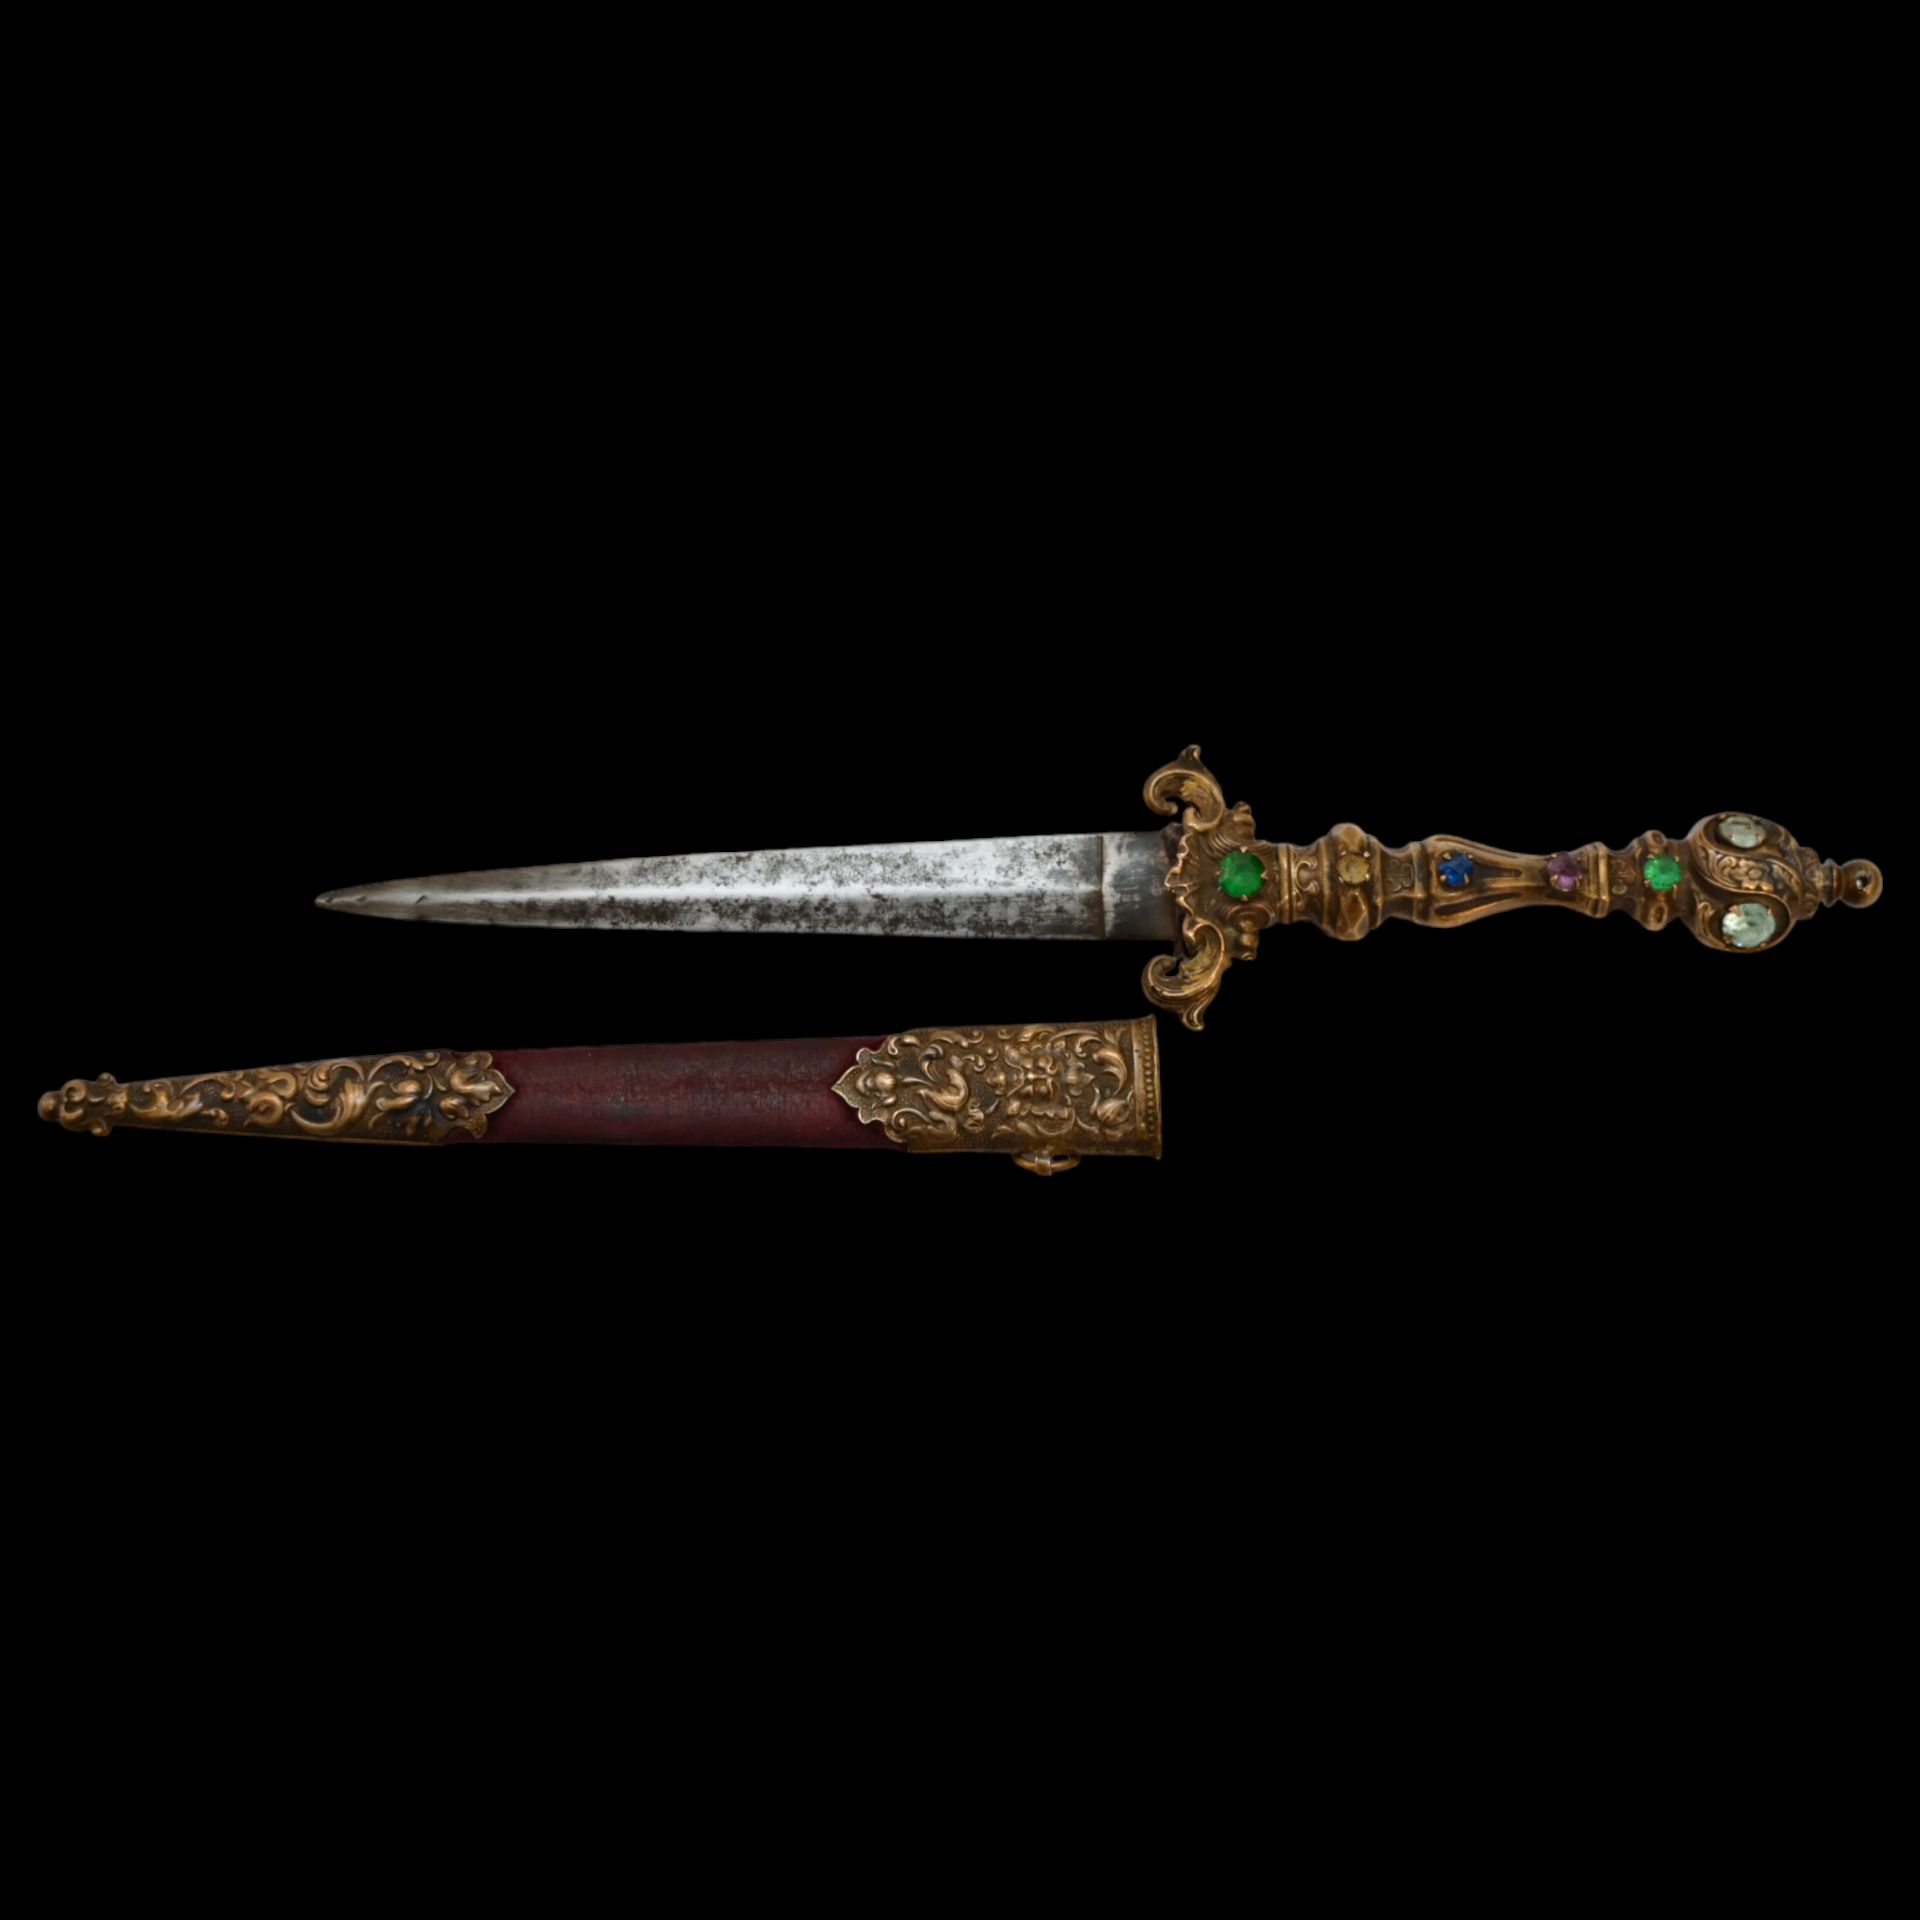 A Very high quality Dagger Renaissance Style Brass with inlaid colored stones, 19th century. - Image 9 of 9